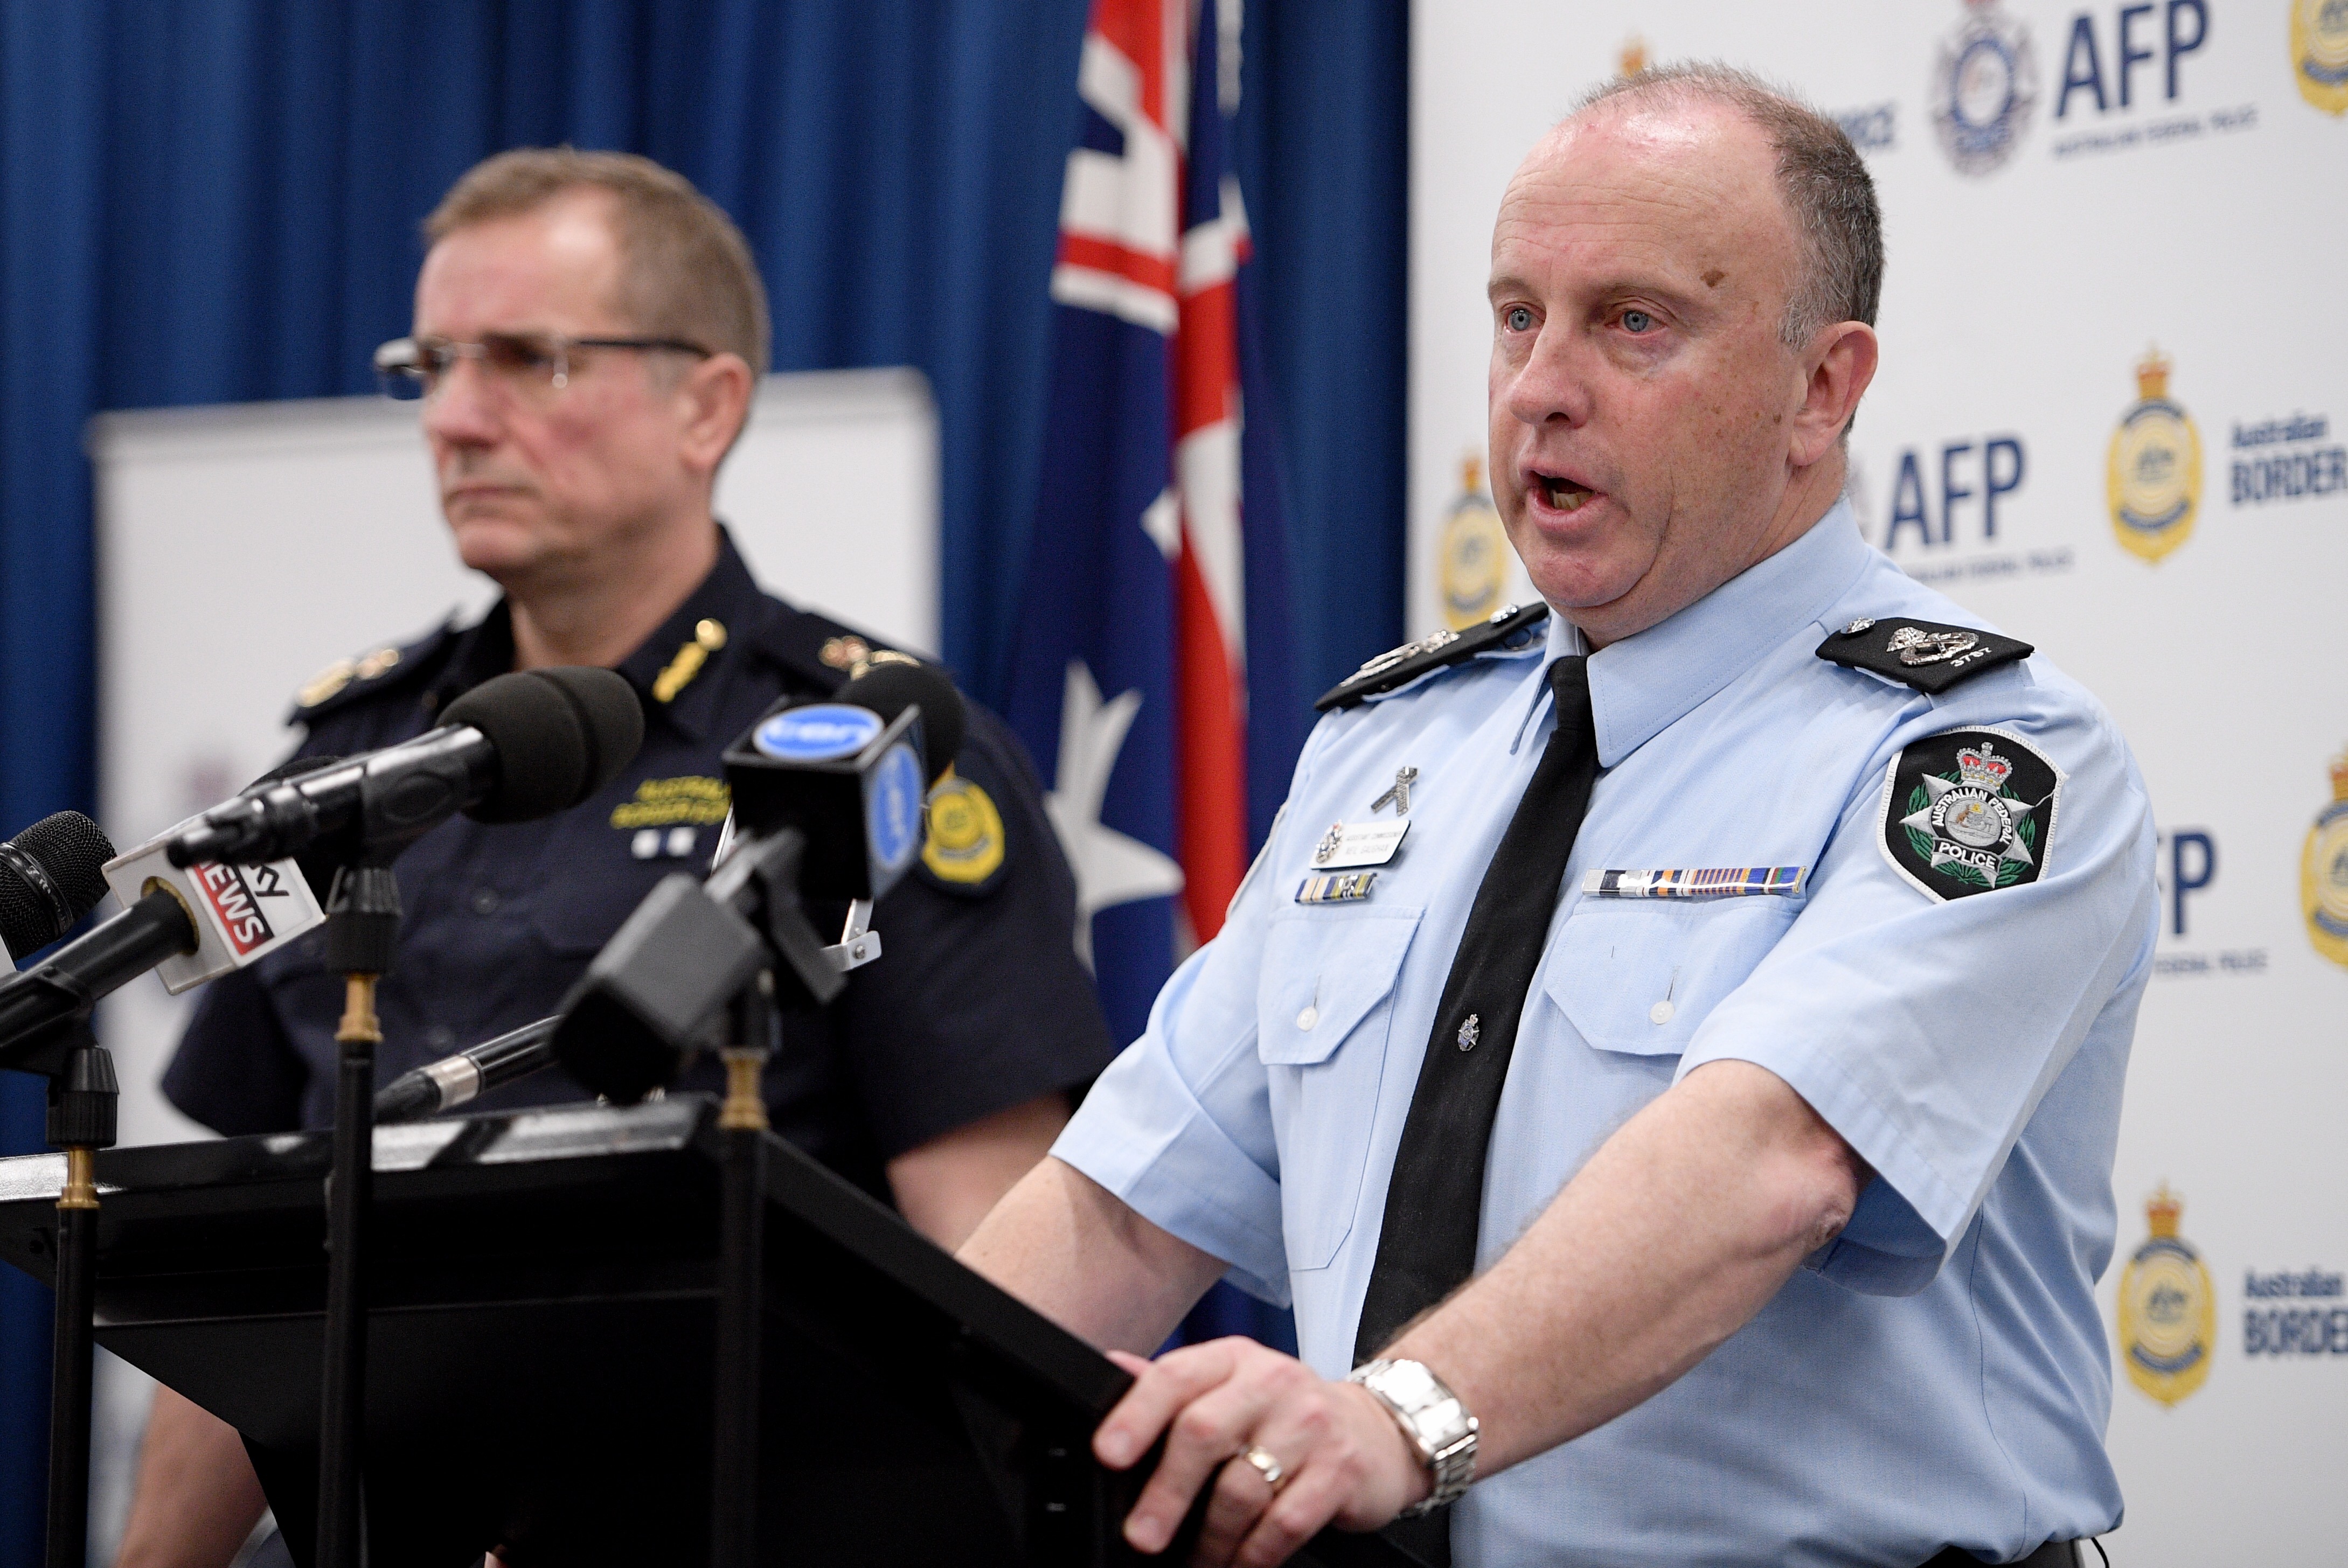 Australian Federal Police Assistant Commissioner Neil Gaughan and ABF Acting Commissioner Michael Outram at this morning's press conference. (AAP)